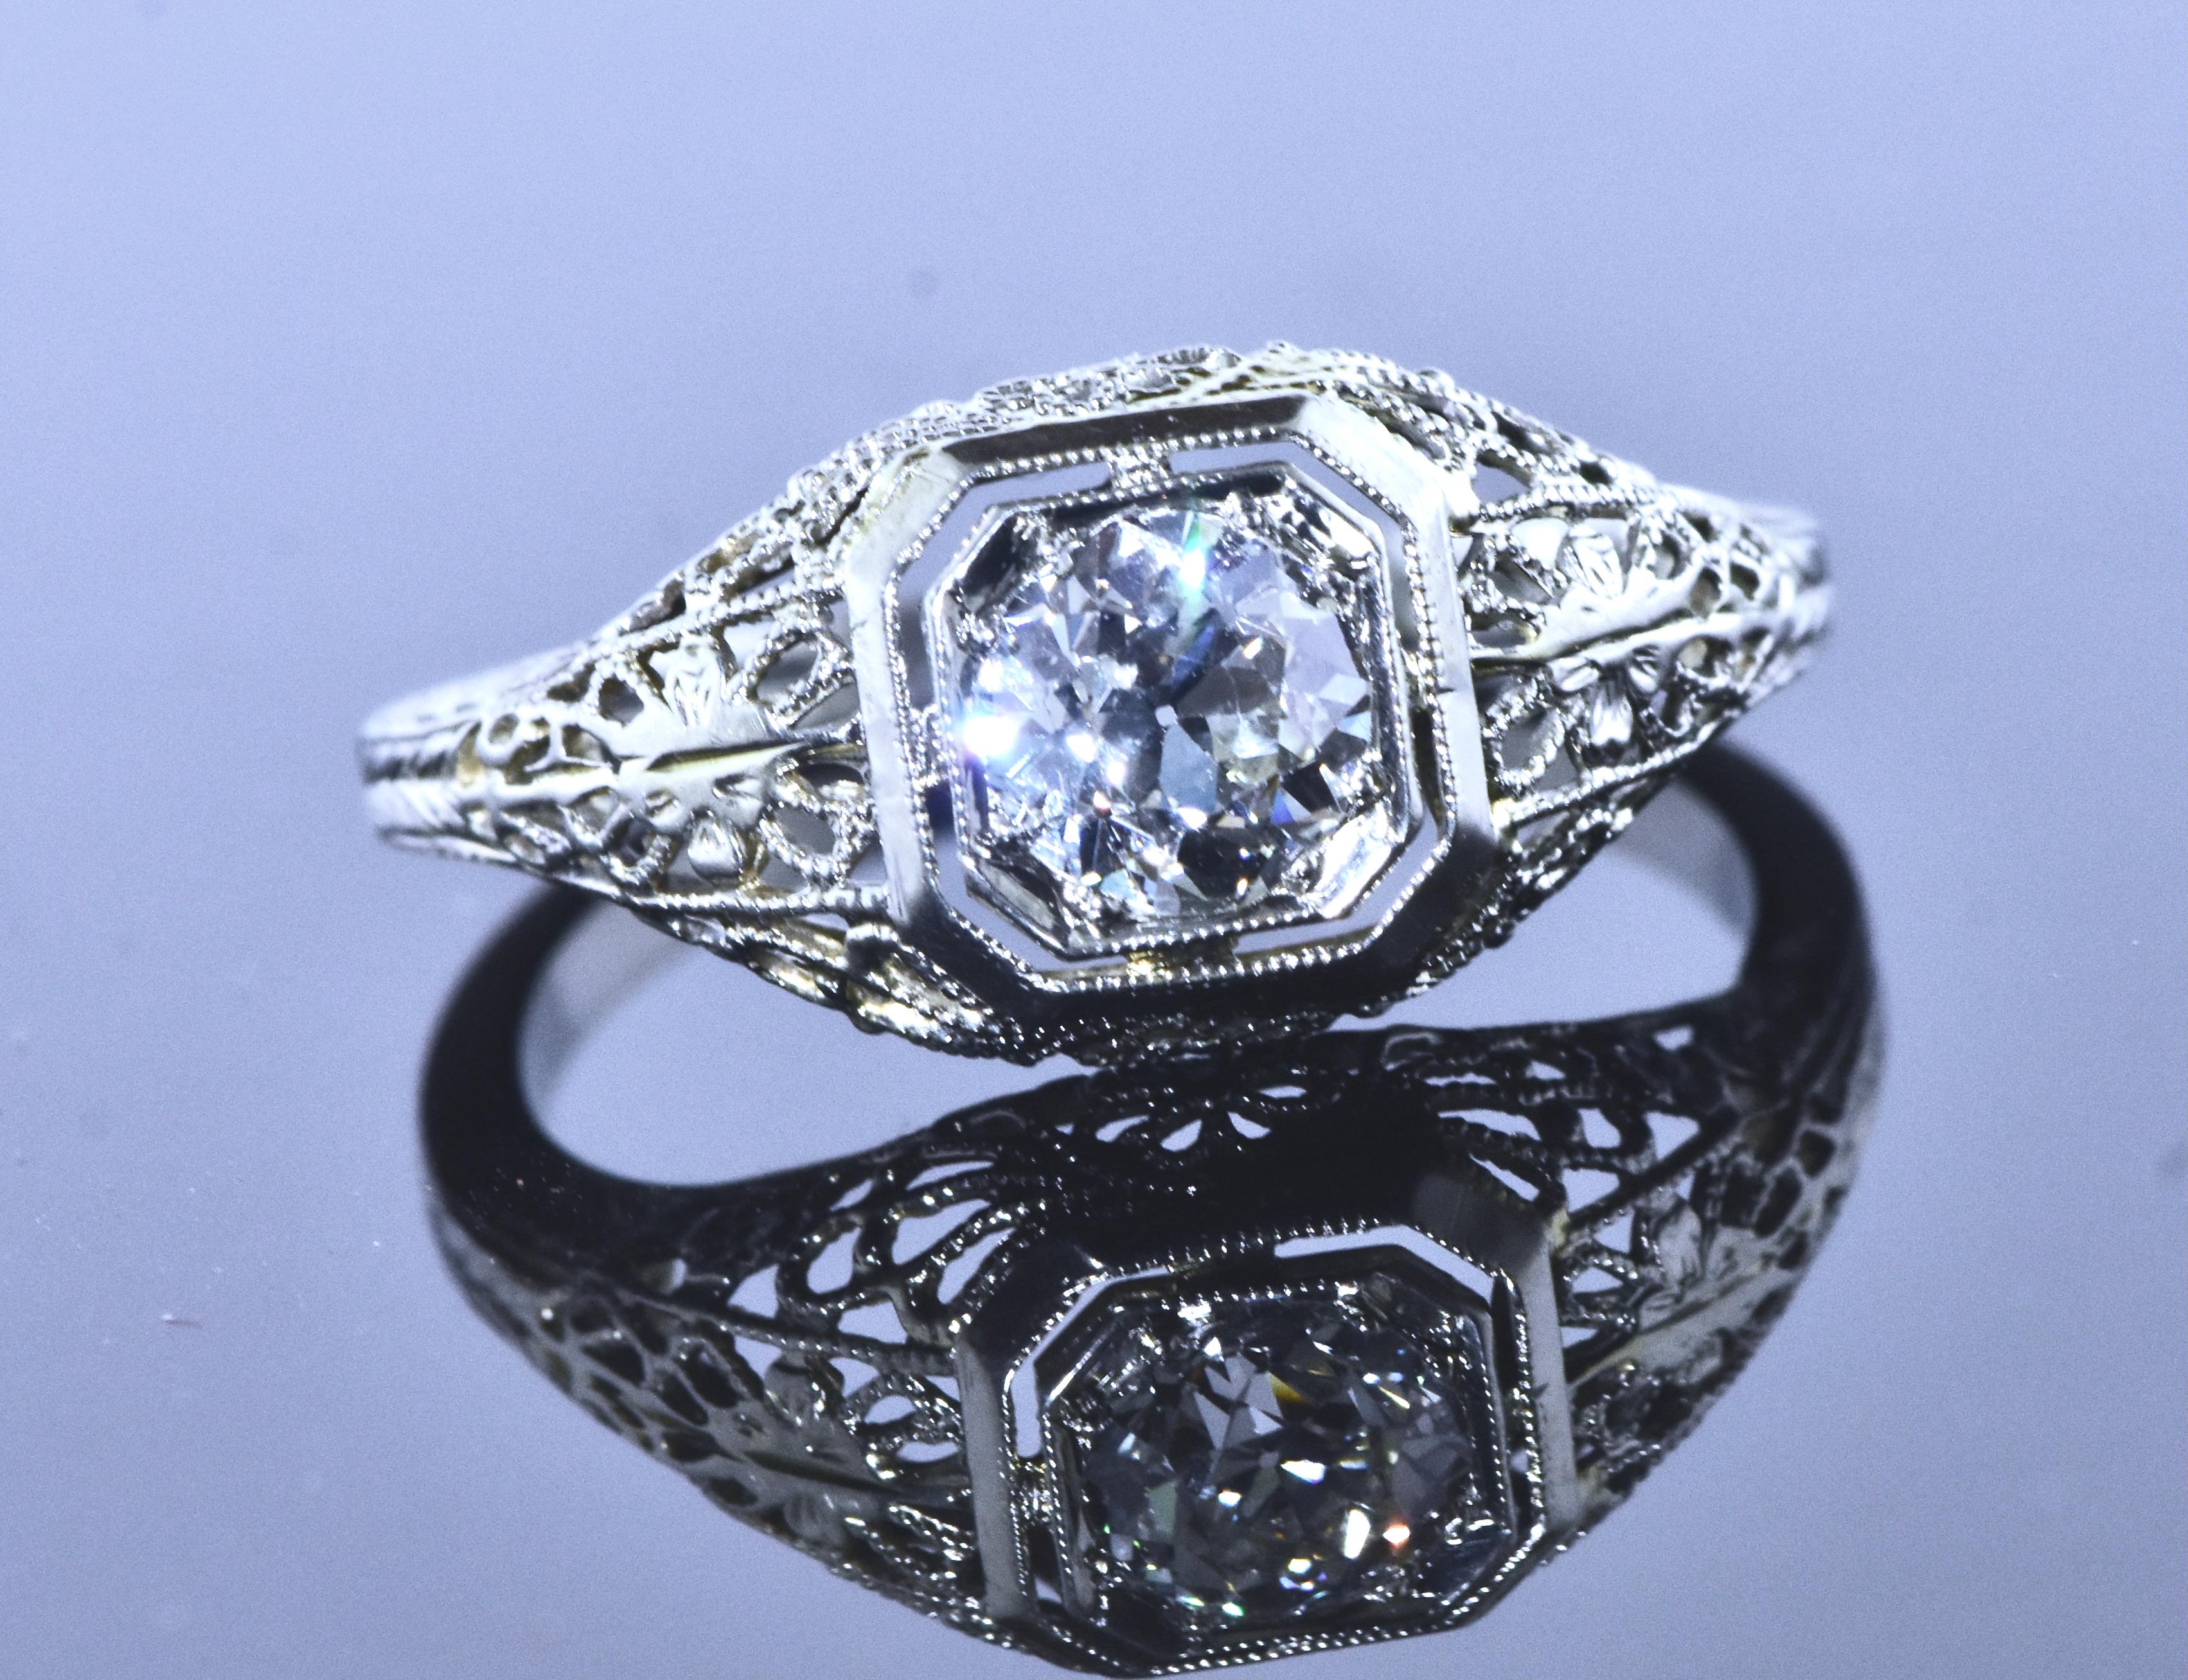 Antique Filigree Ring Fine .65 Ct. Diamond and 18K White Gold, American, c. 1920 For Sale 1